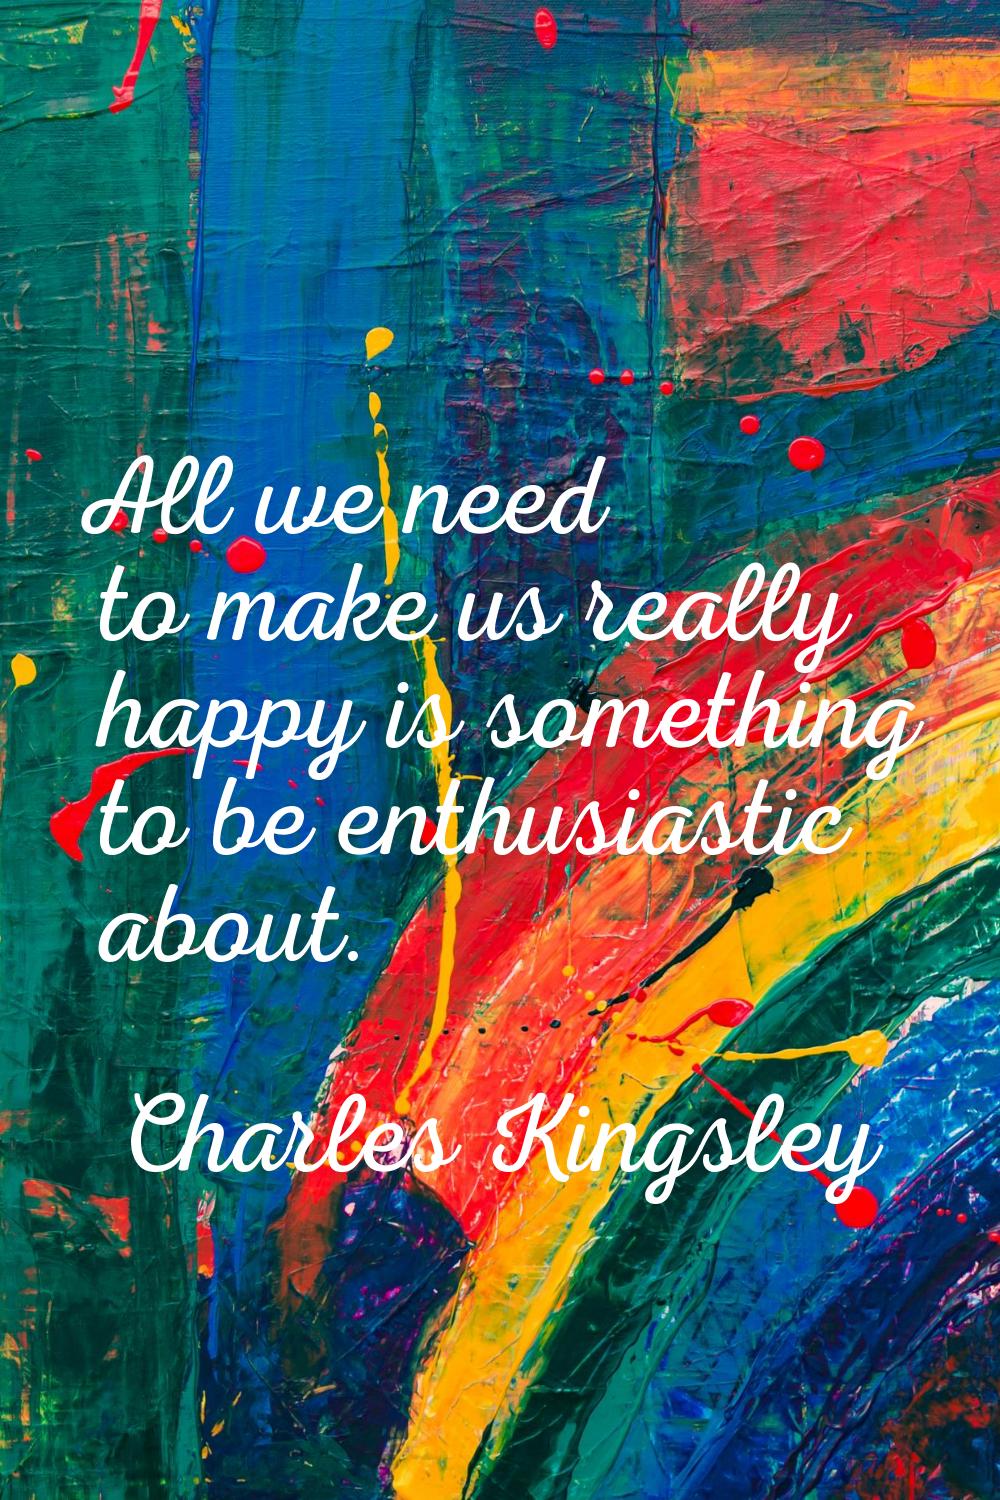 All we need to make us really happy is something to be enthusiastic about.